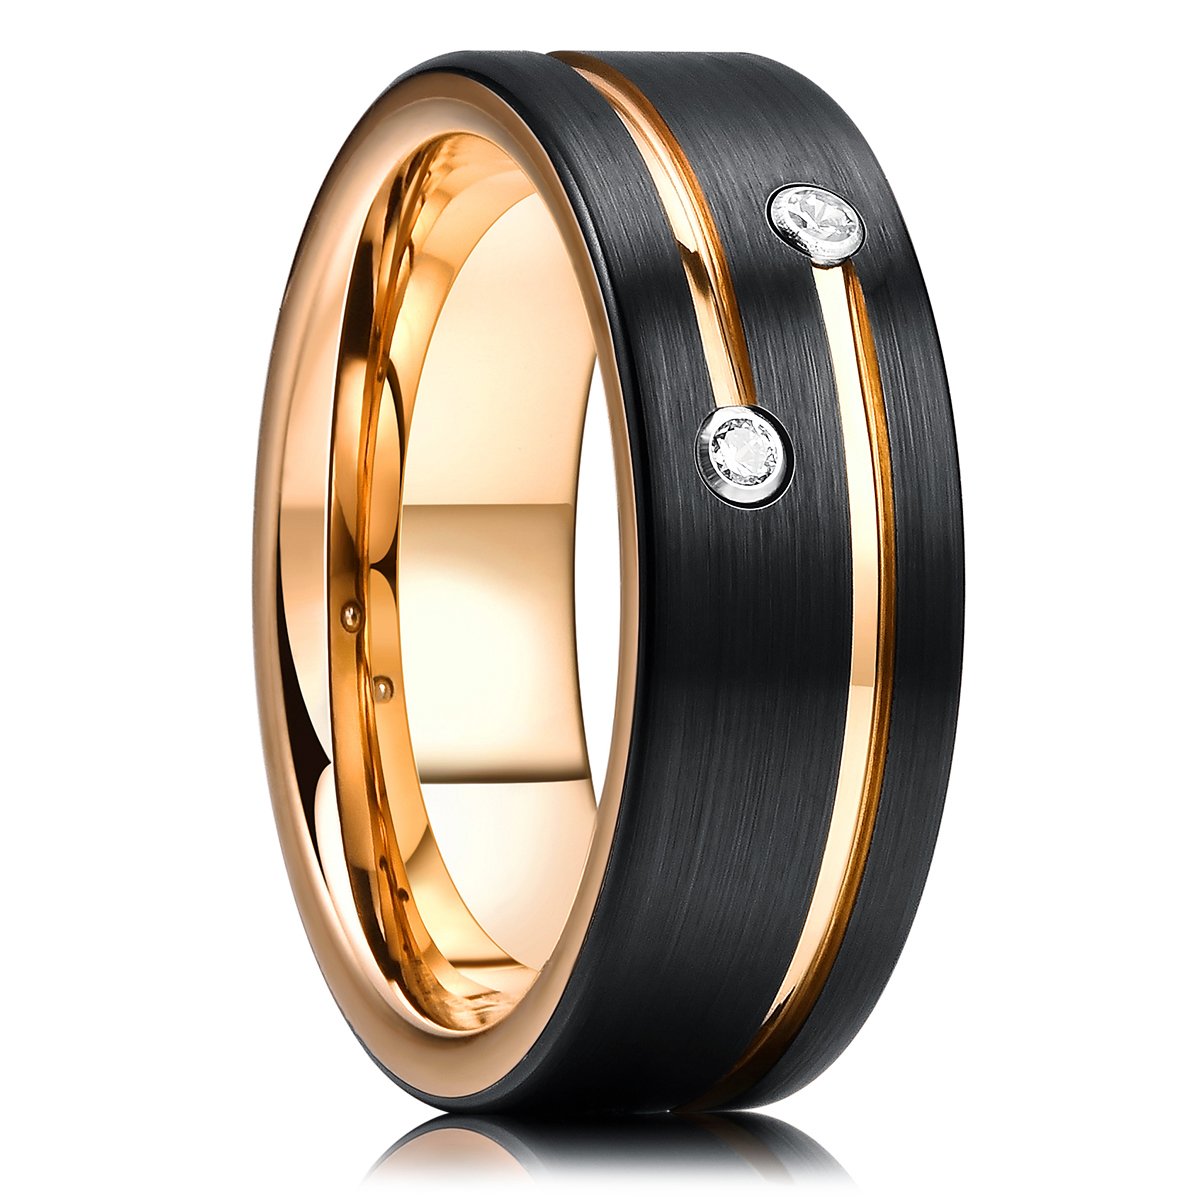 8mm Men's Black Brushed Steel Ring Zircon Inlaid Gold Grooved Line Ring